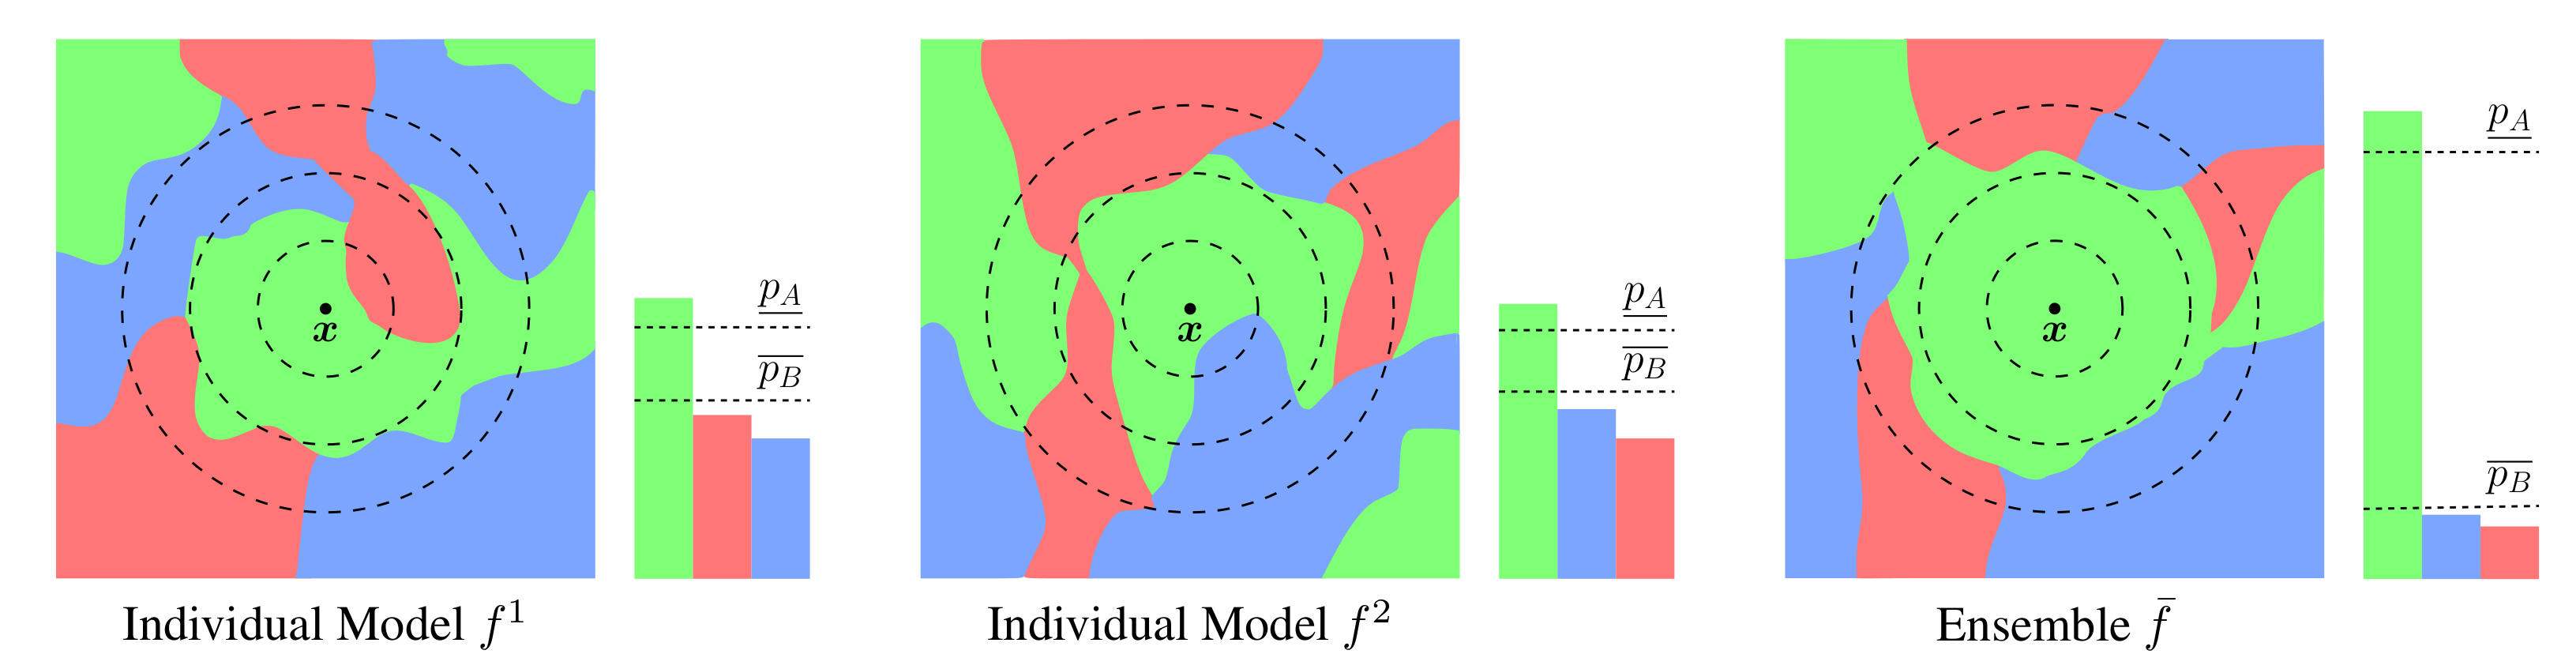 Prediciton landscape of two individual models and an ensemble.